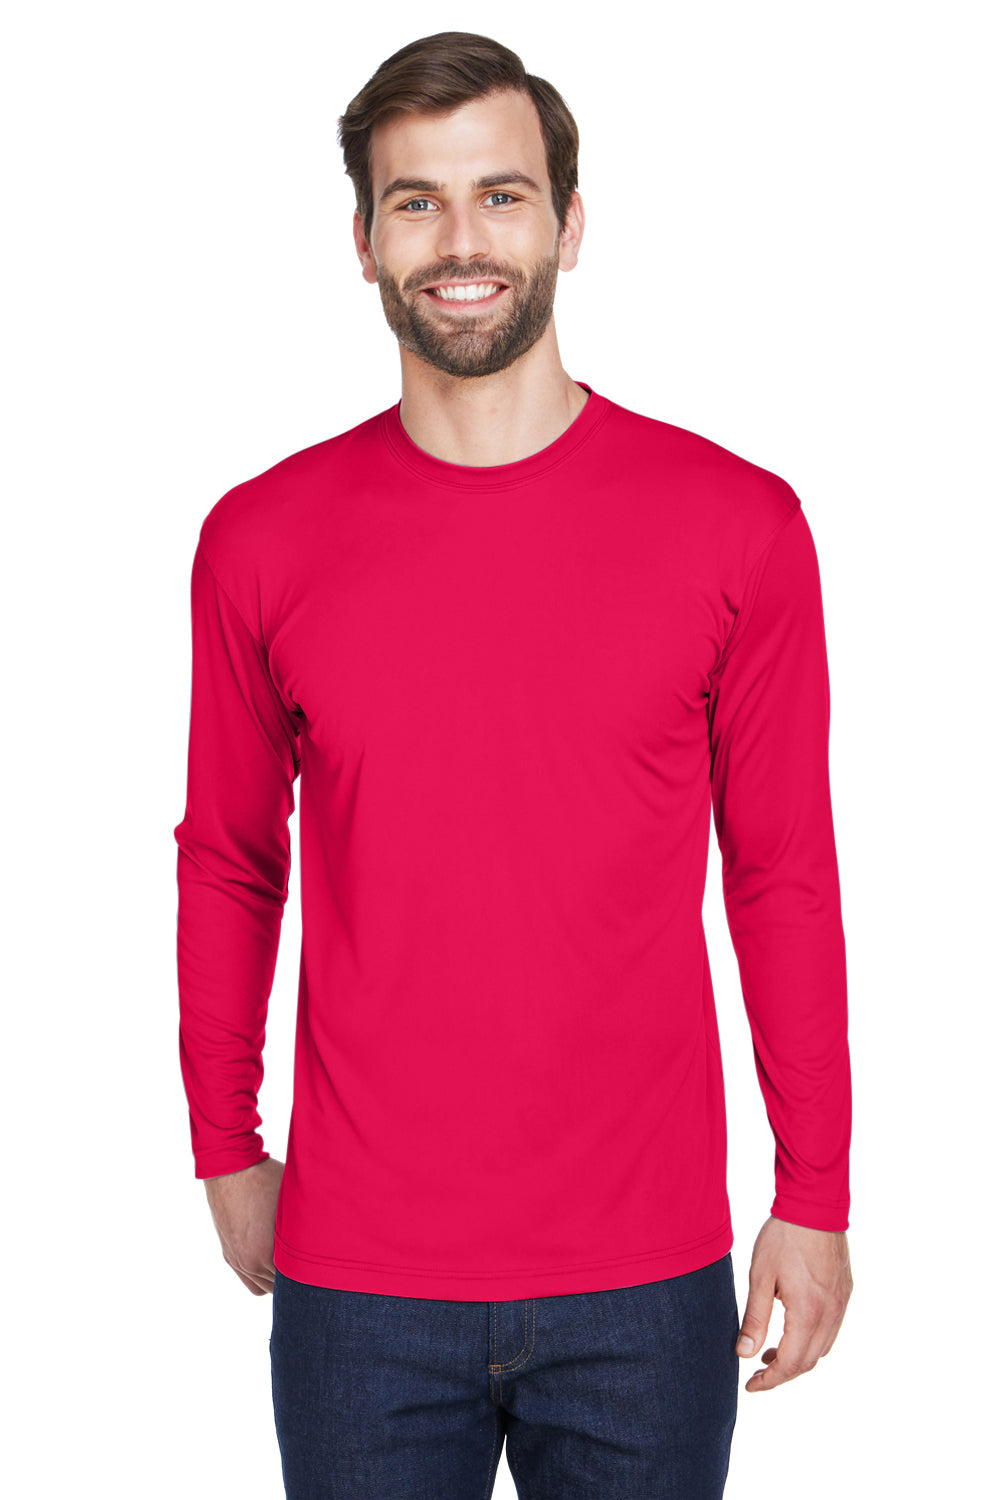 UltraClub 8422 Mens Cool & Dry Performance Moisture Wicking Long Sleeve Crewneck T-Shirt Red Front